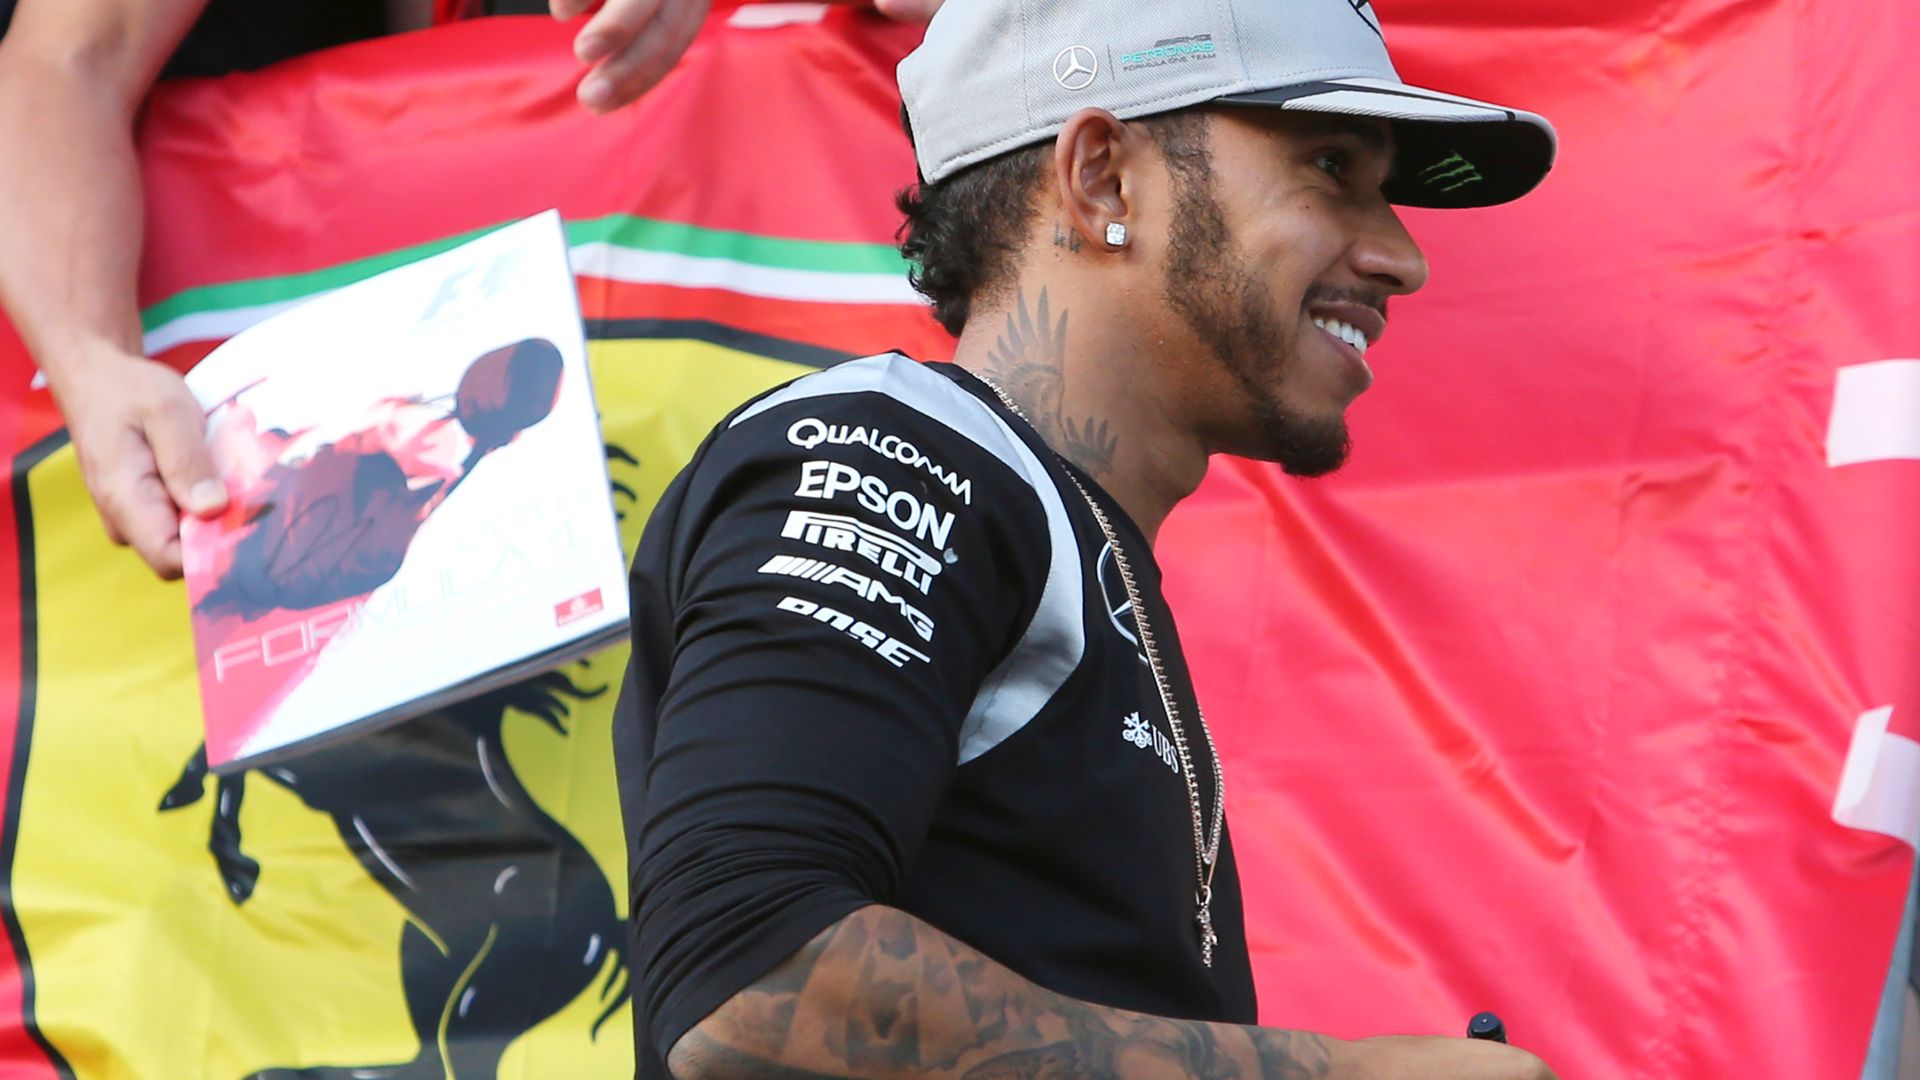 Hamilton to Ferrari: The questions that need to be answered